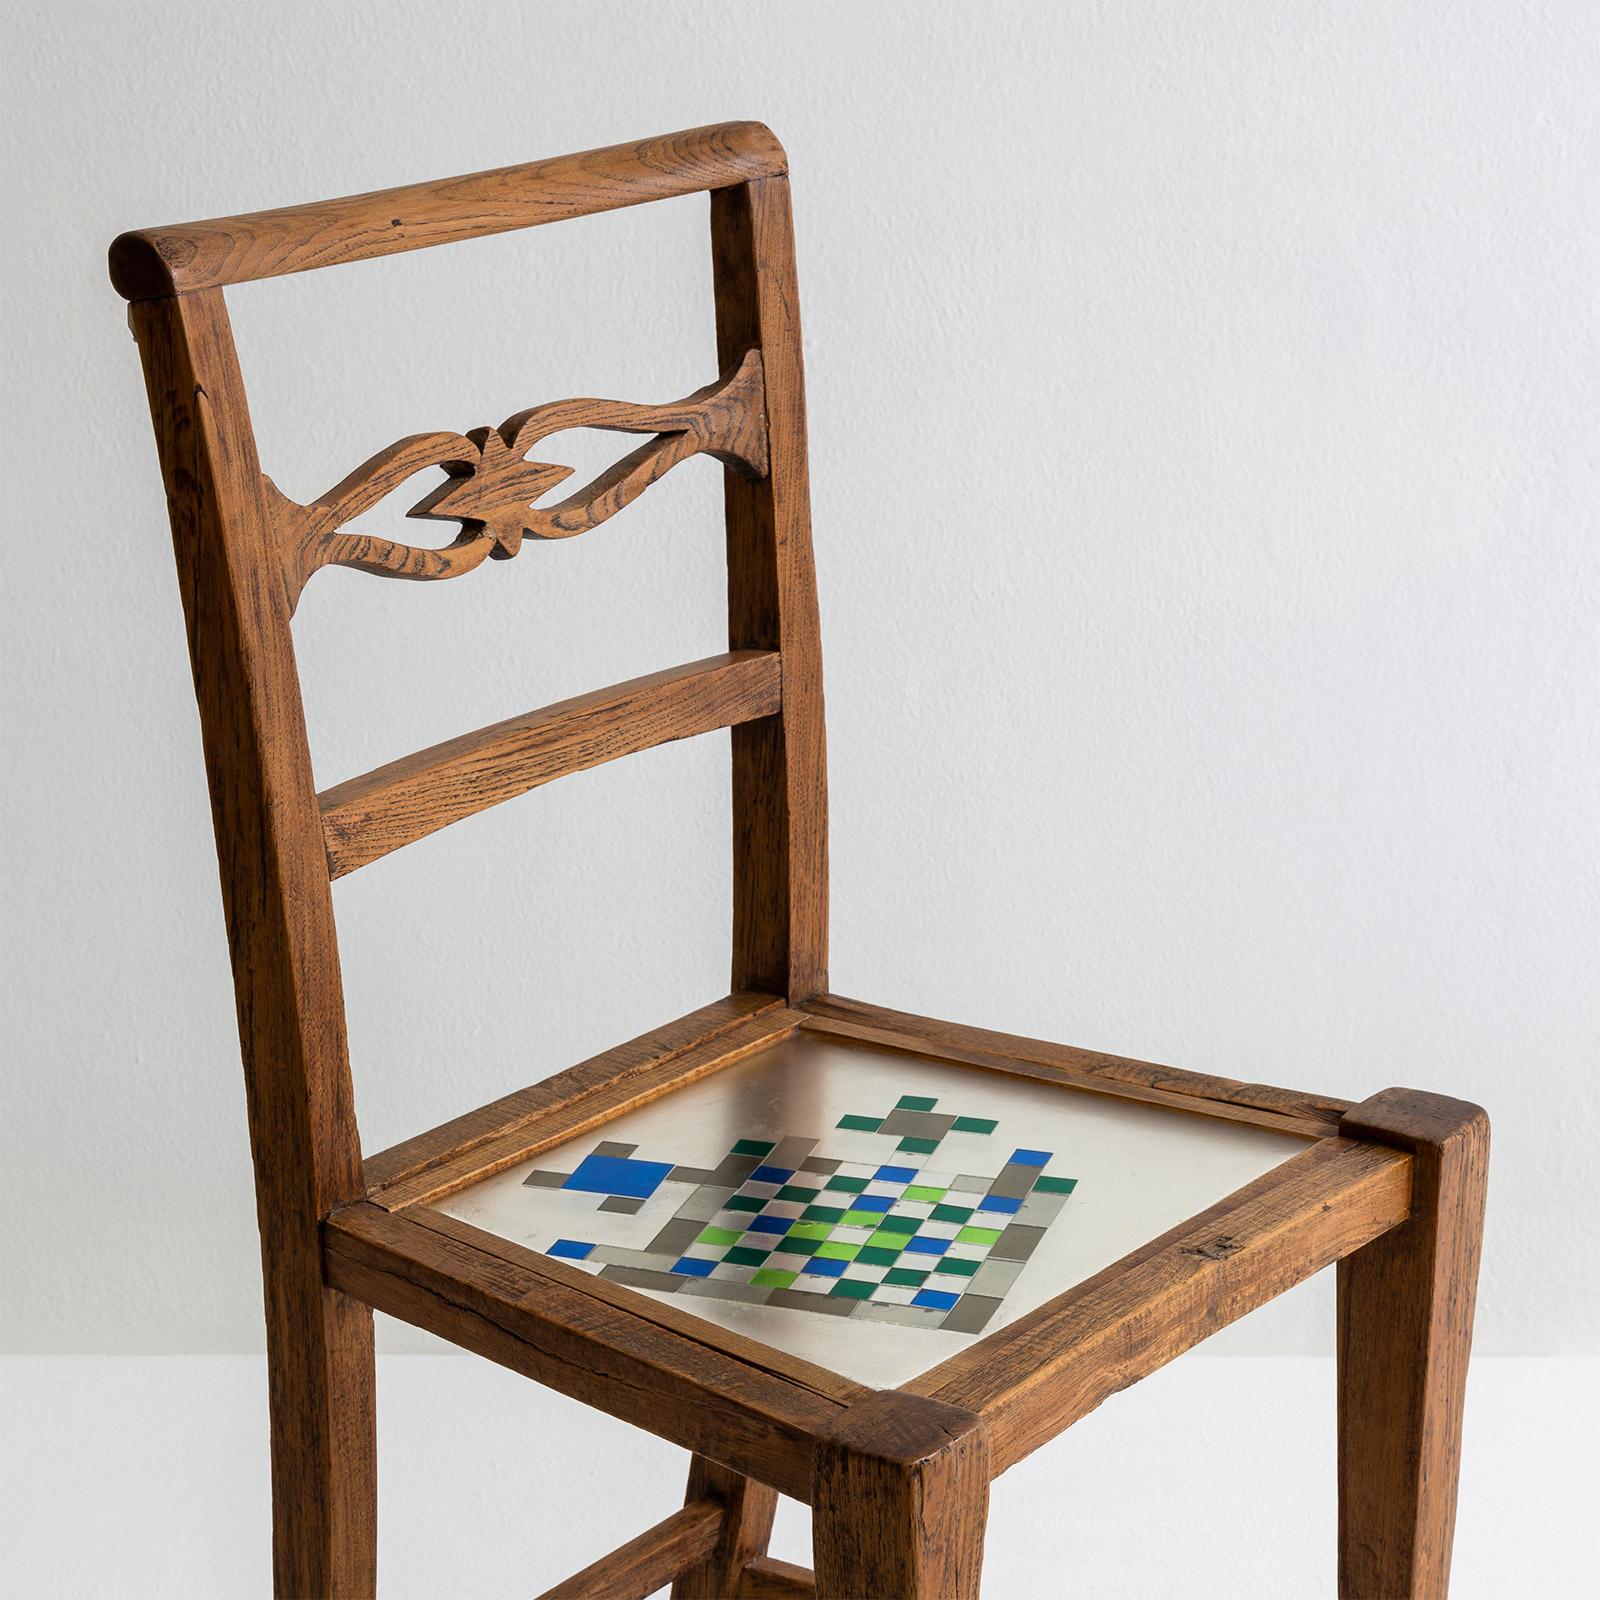 Modern Mosaiced Chair in Chestnut Wood with Mosaic Seat by Hillsideout For Sale